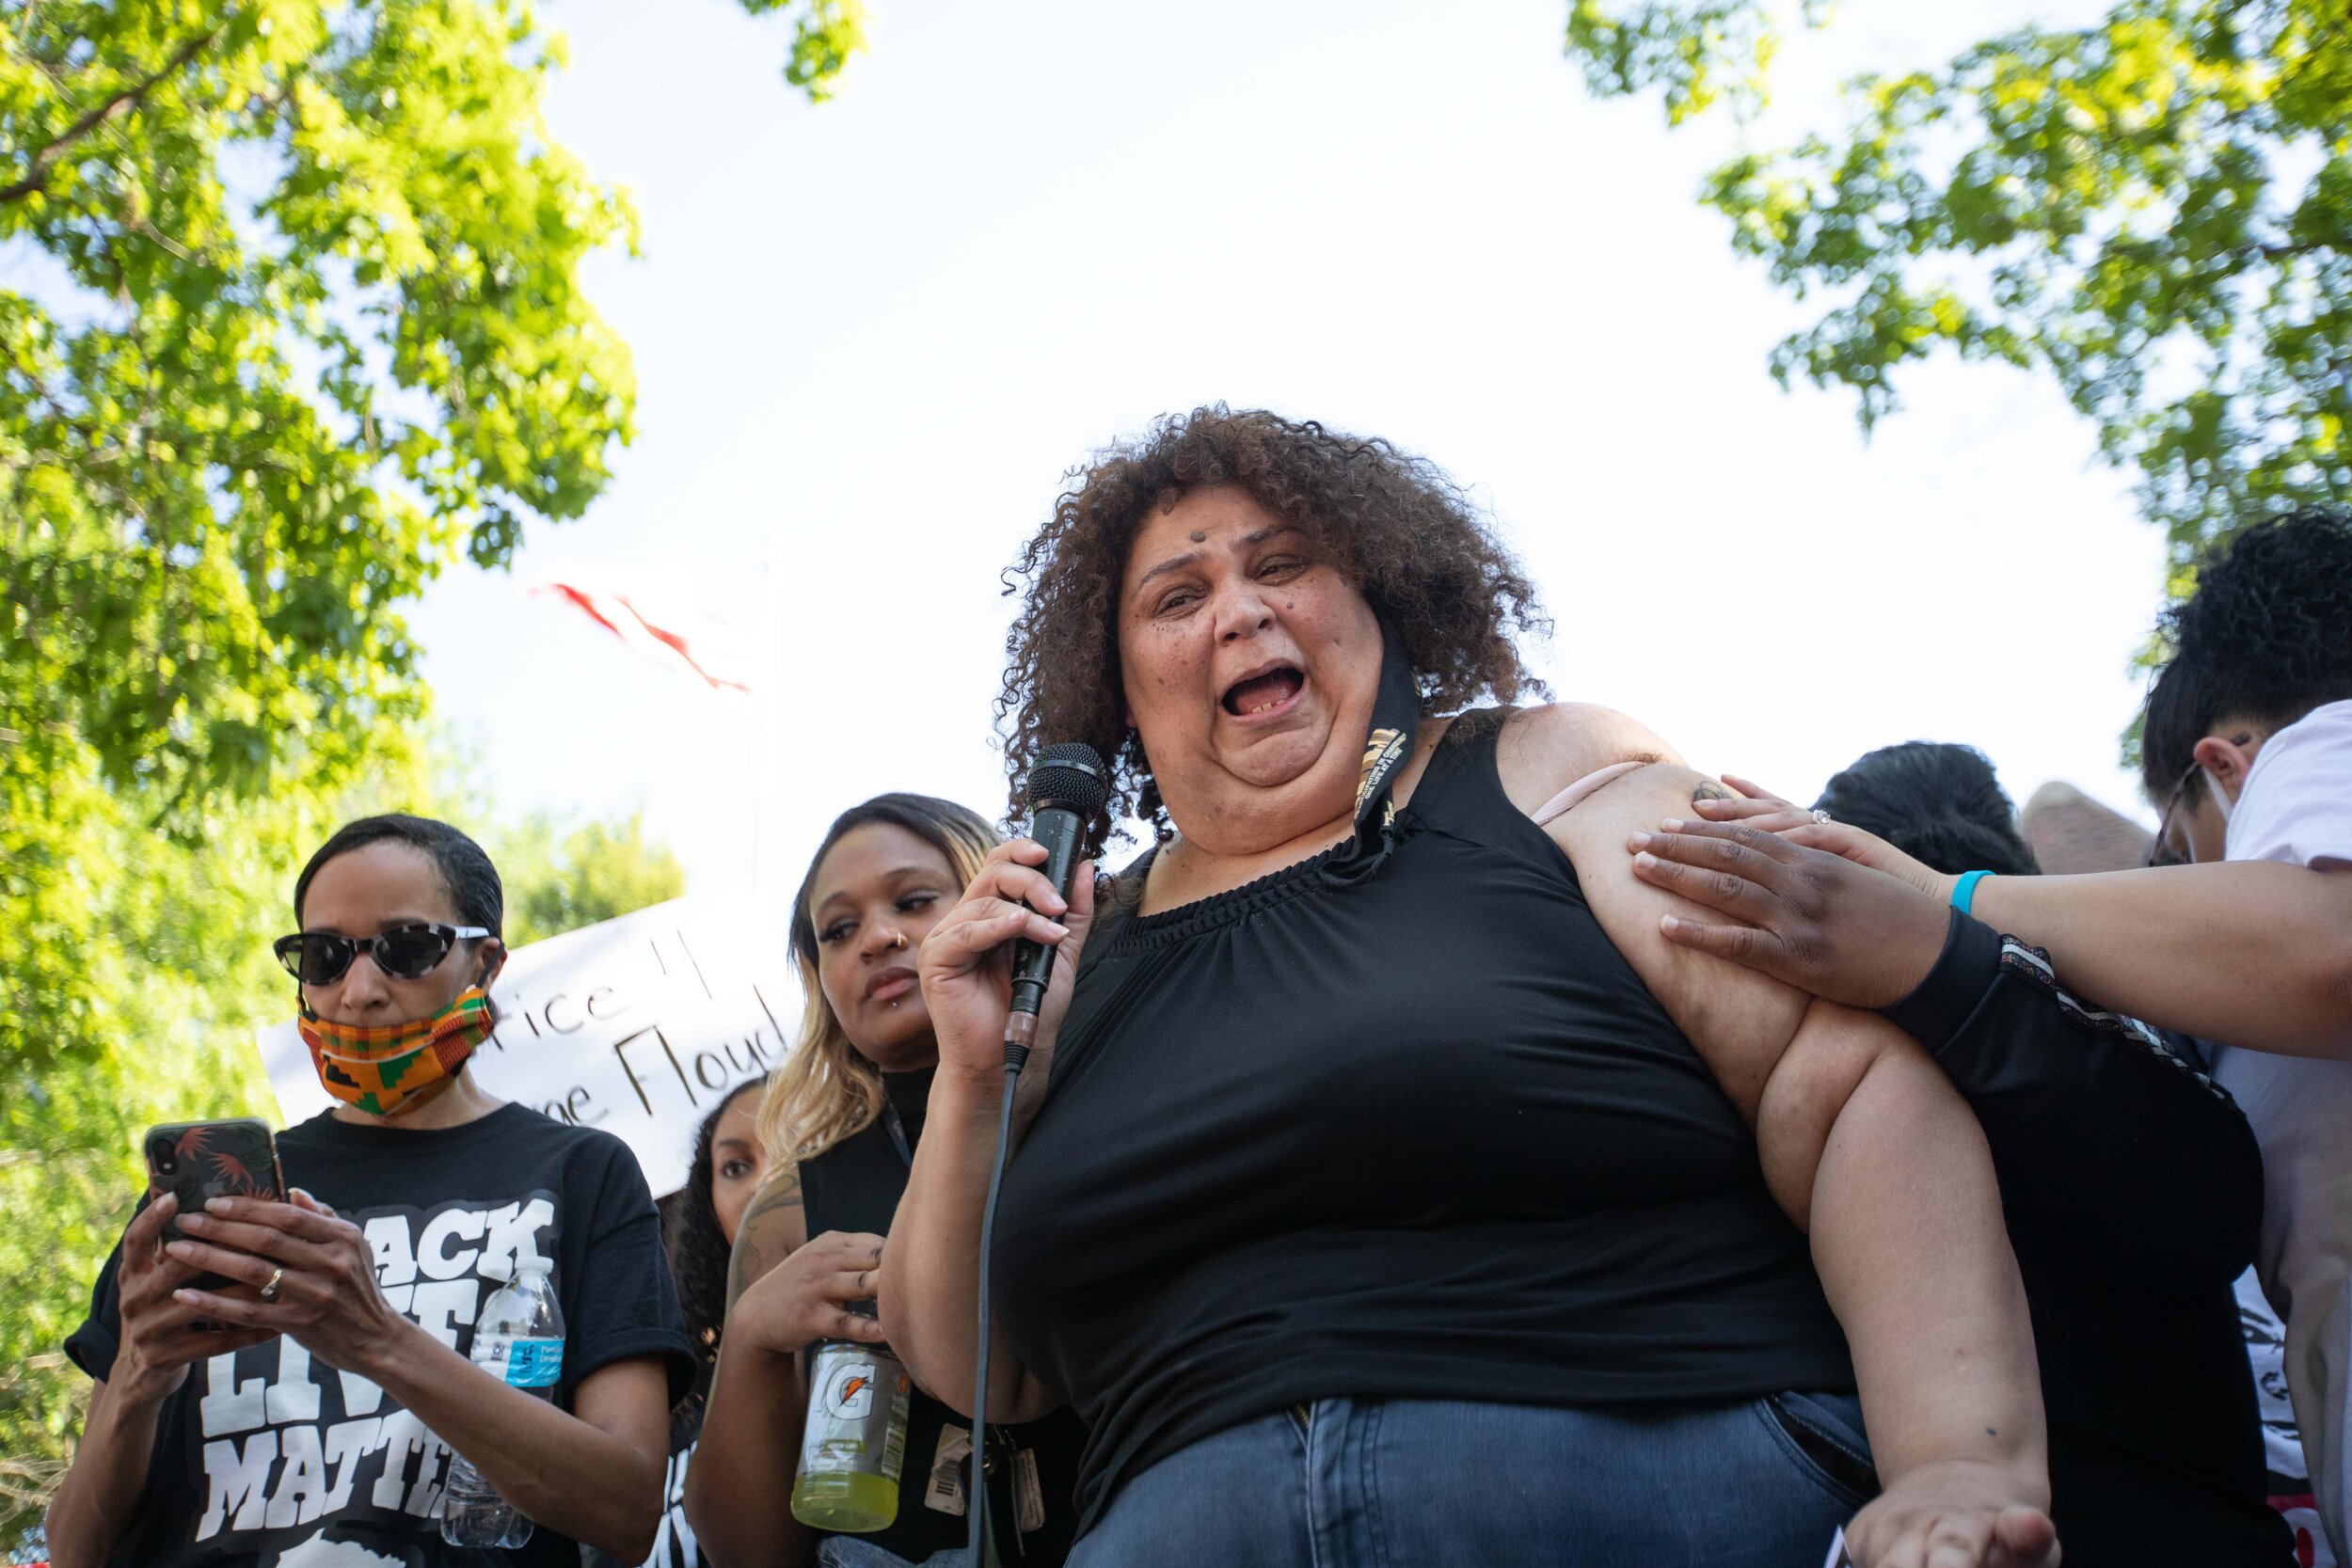  "George did have a pre-exosting condition and that was a knee in his neck," Angel, the niece of George Floyd said as she spoke to the crowd of protesters in front of the Governors Mansion in Saint Paul, Minnesota on June 1, 2020. Chris Juhn/Zenger 